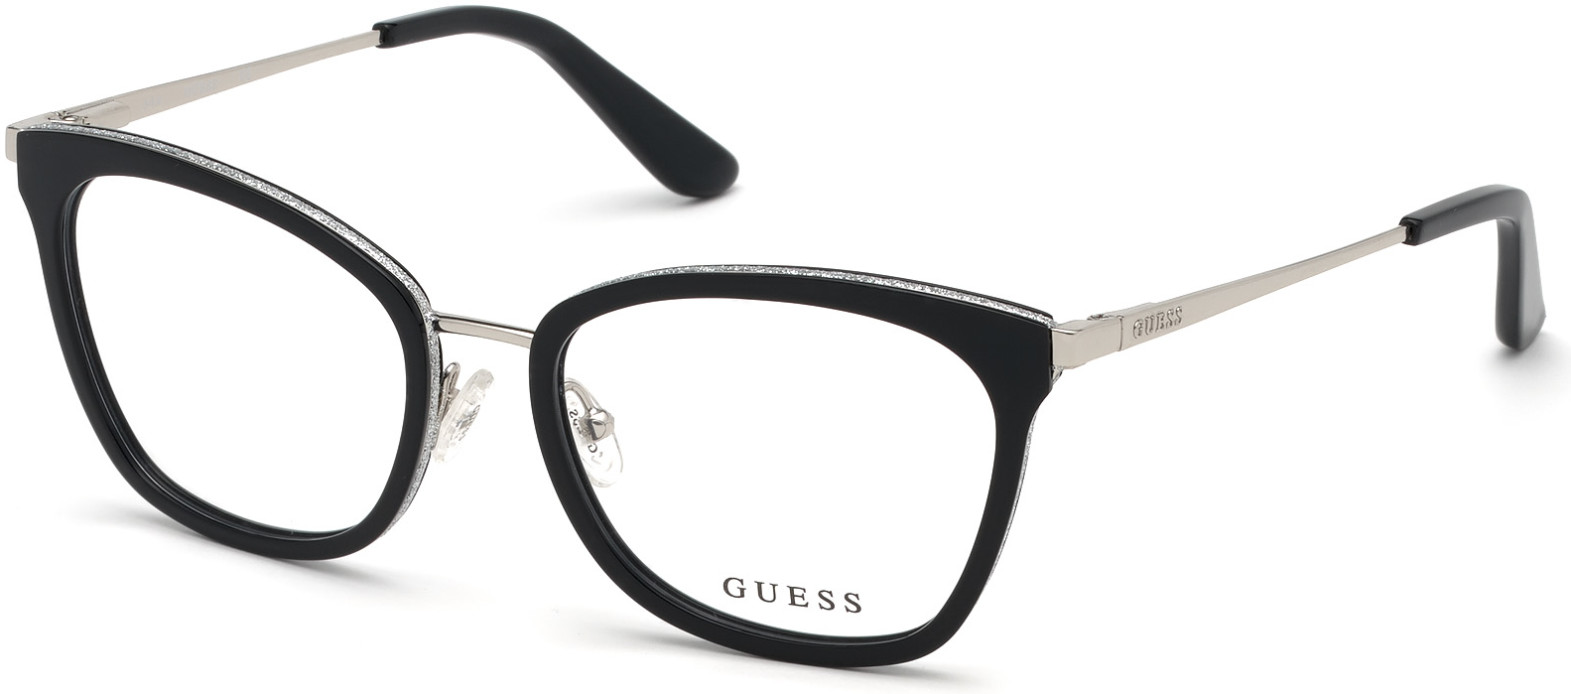 GUESS 2706 001